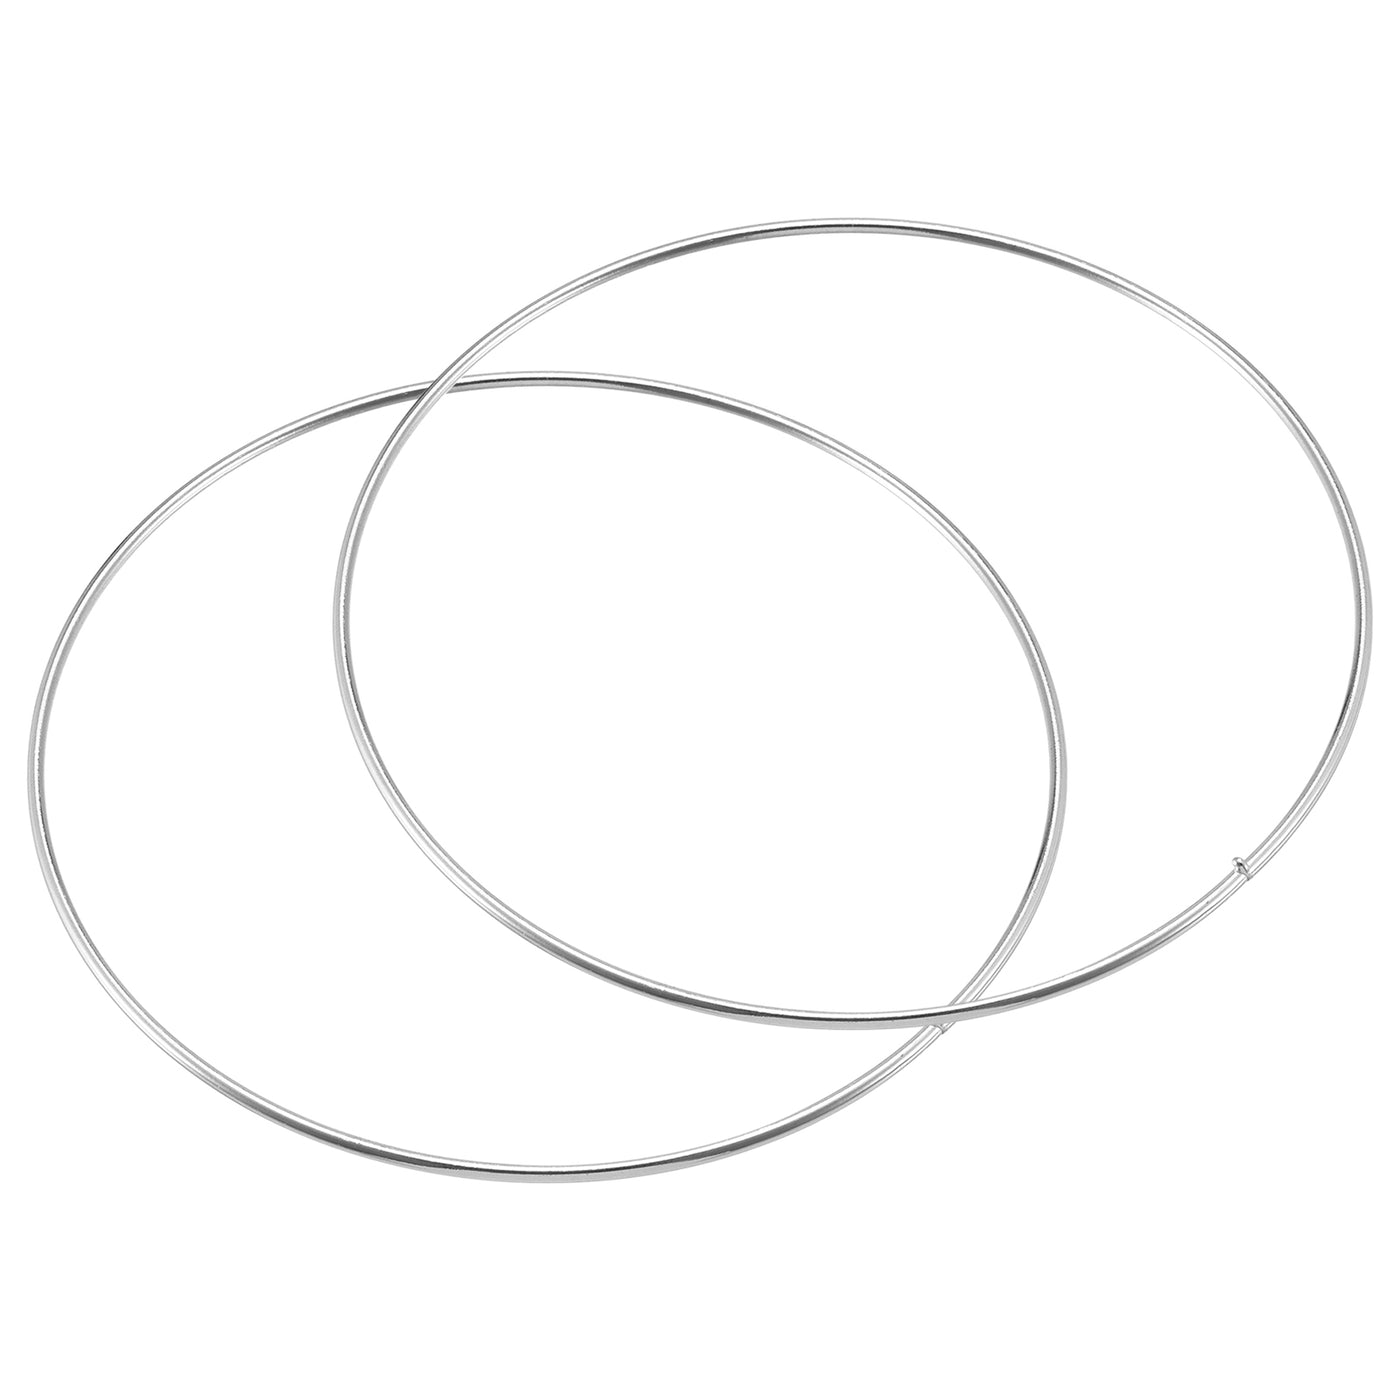 uxcell Uxcell 150mm(5.91") OD Metal O Ring Non-Welded Craft Hoops for DIY Silver Tone 2pcs